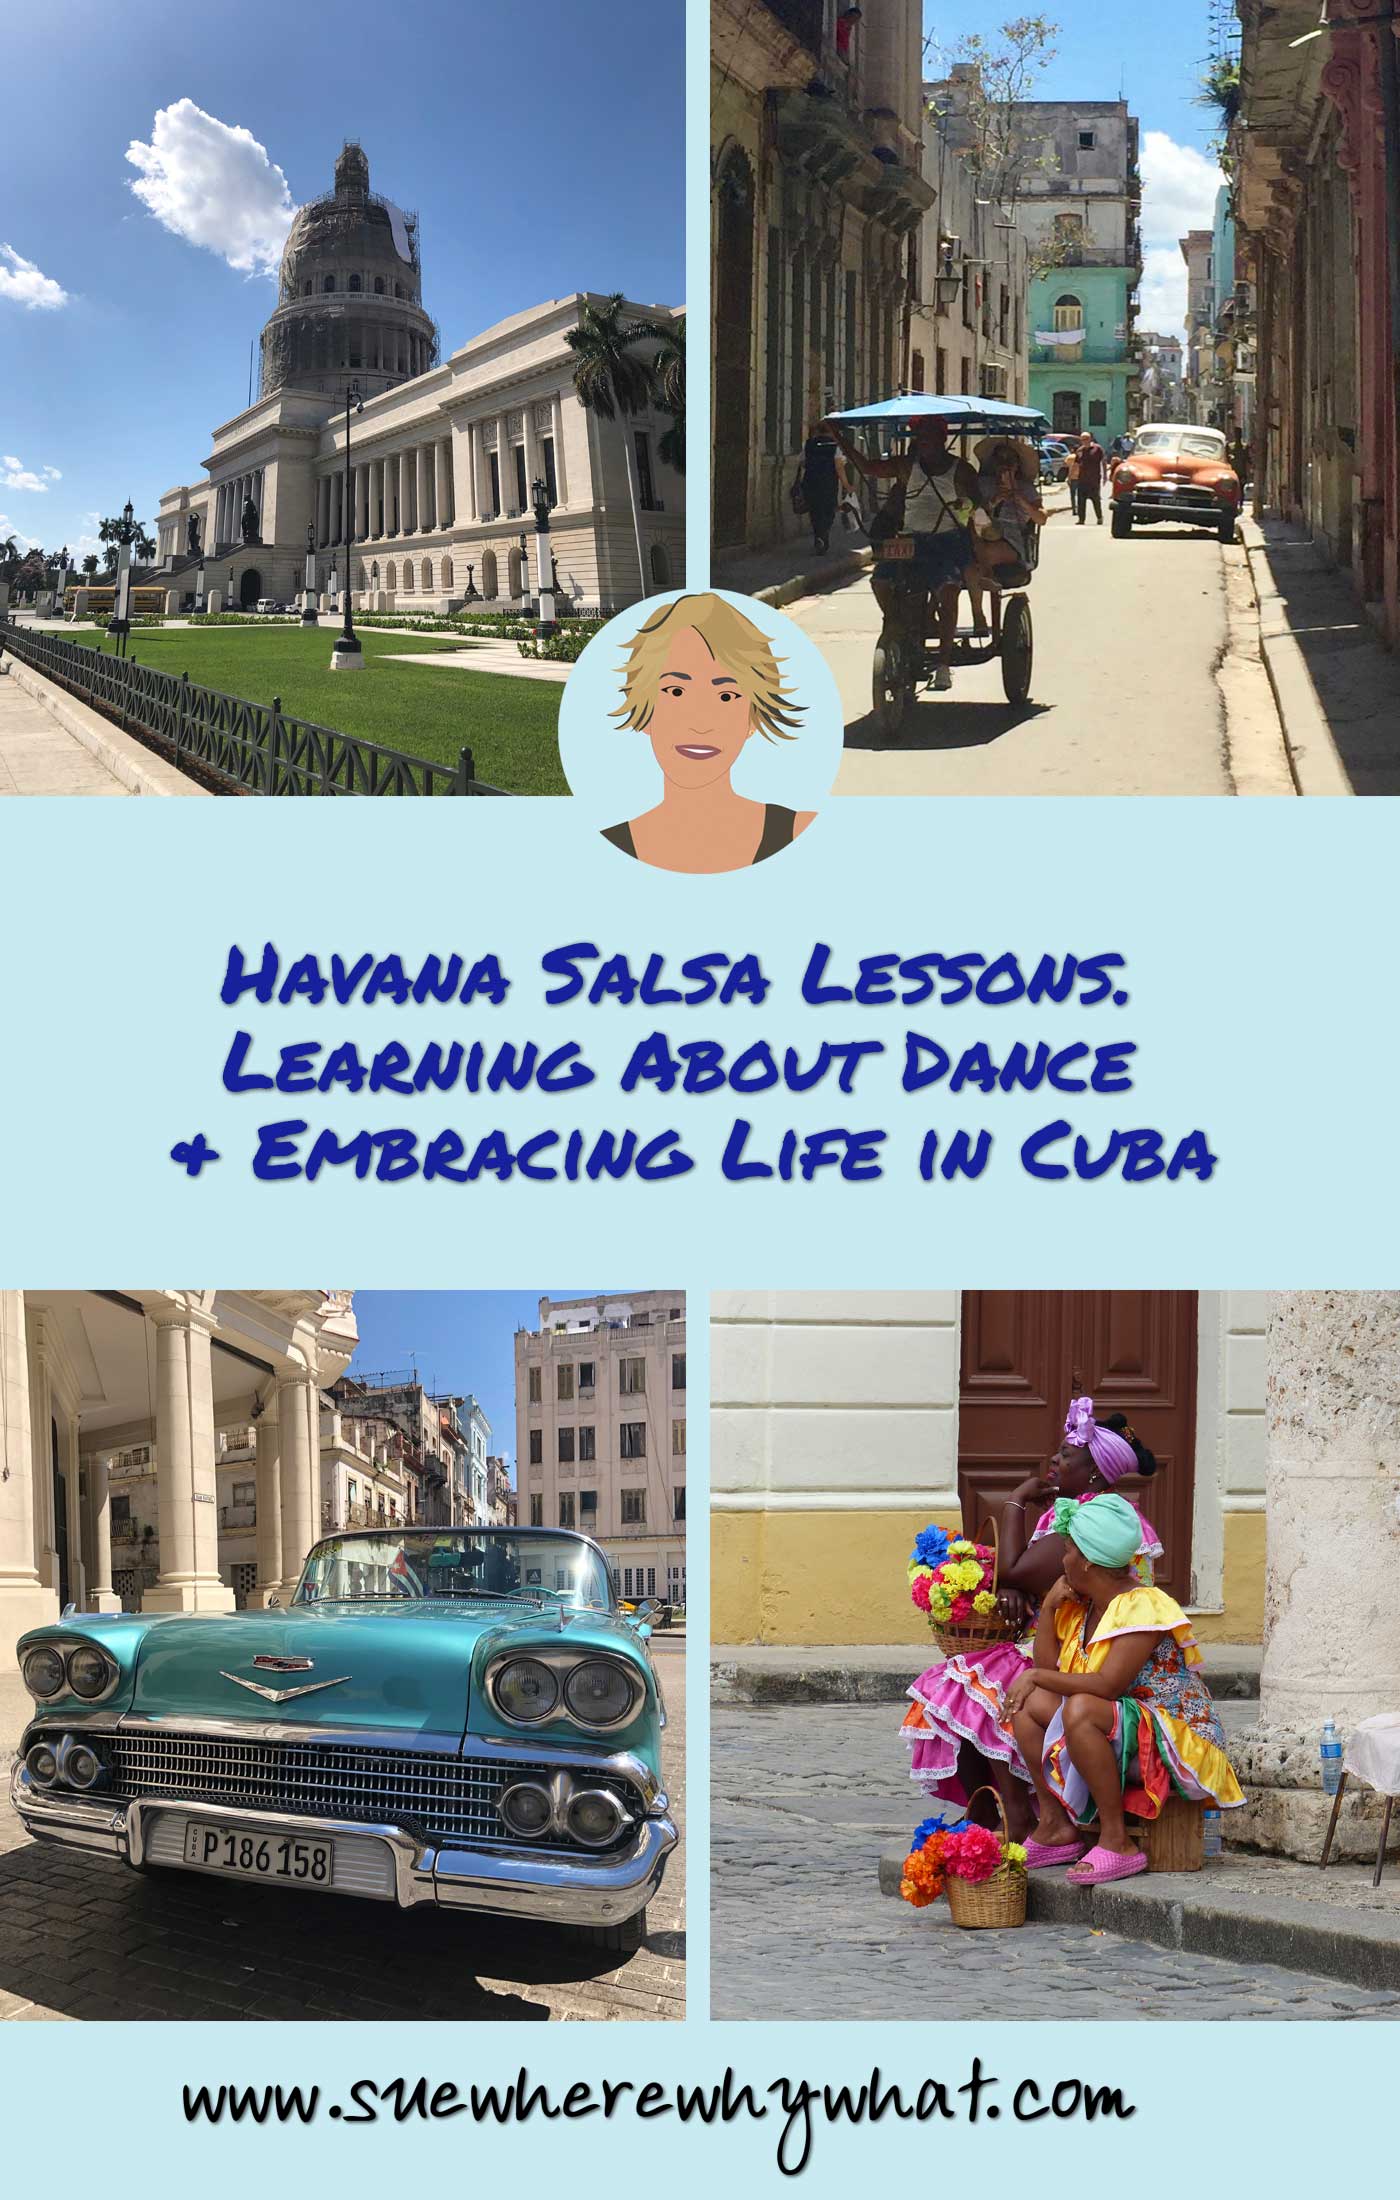 Havana Salsa Lessons. Learning About Dance and Embracing Life in Cuba